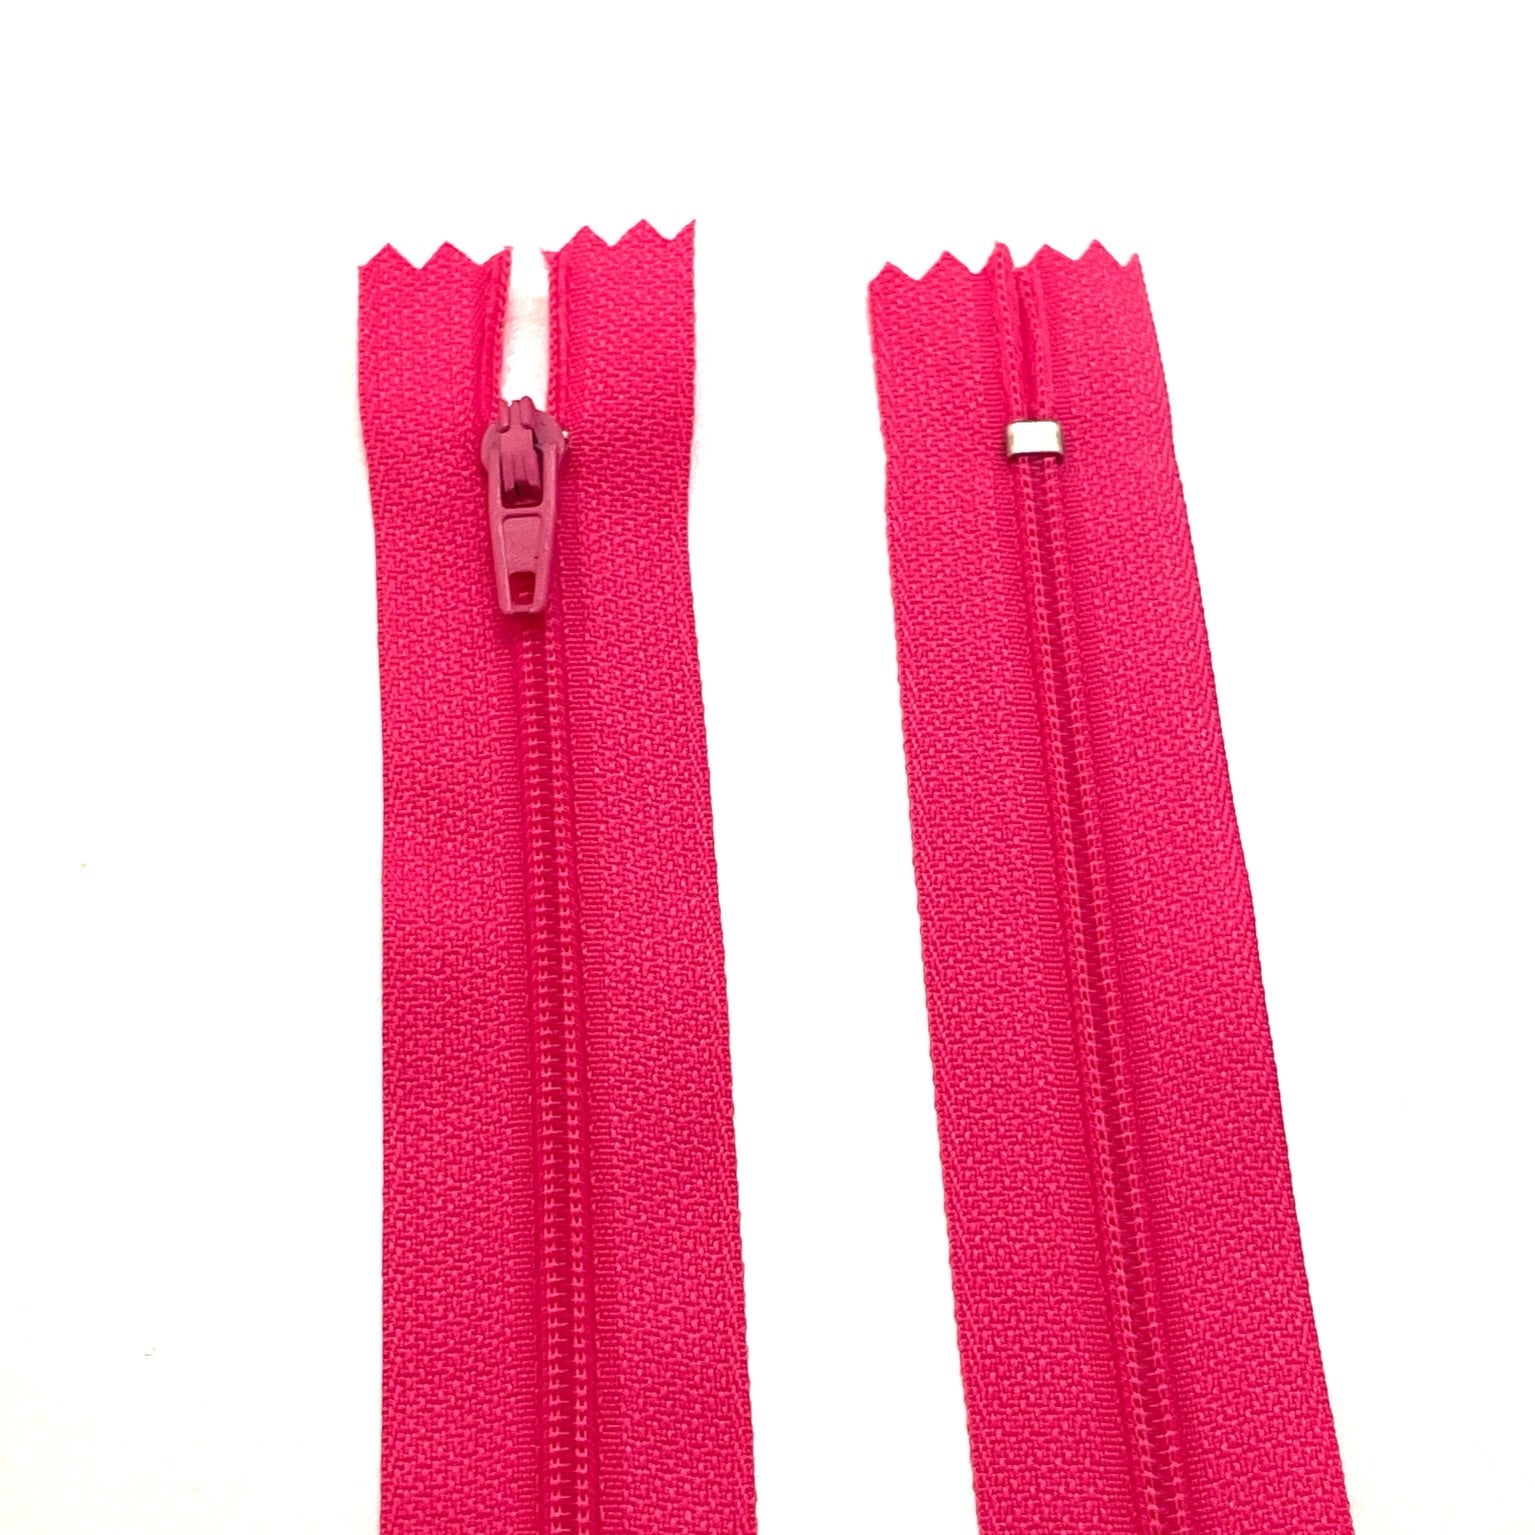 Photo of pink nylon zips available in 25 colors and 5 sizes. Excellent quality zippers for craft and dressmaking purposes. Perfect for dresses, skirts, trousers, bags, purses, cushions, and numerous other projects. So many possibilities, so little time!